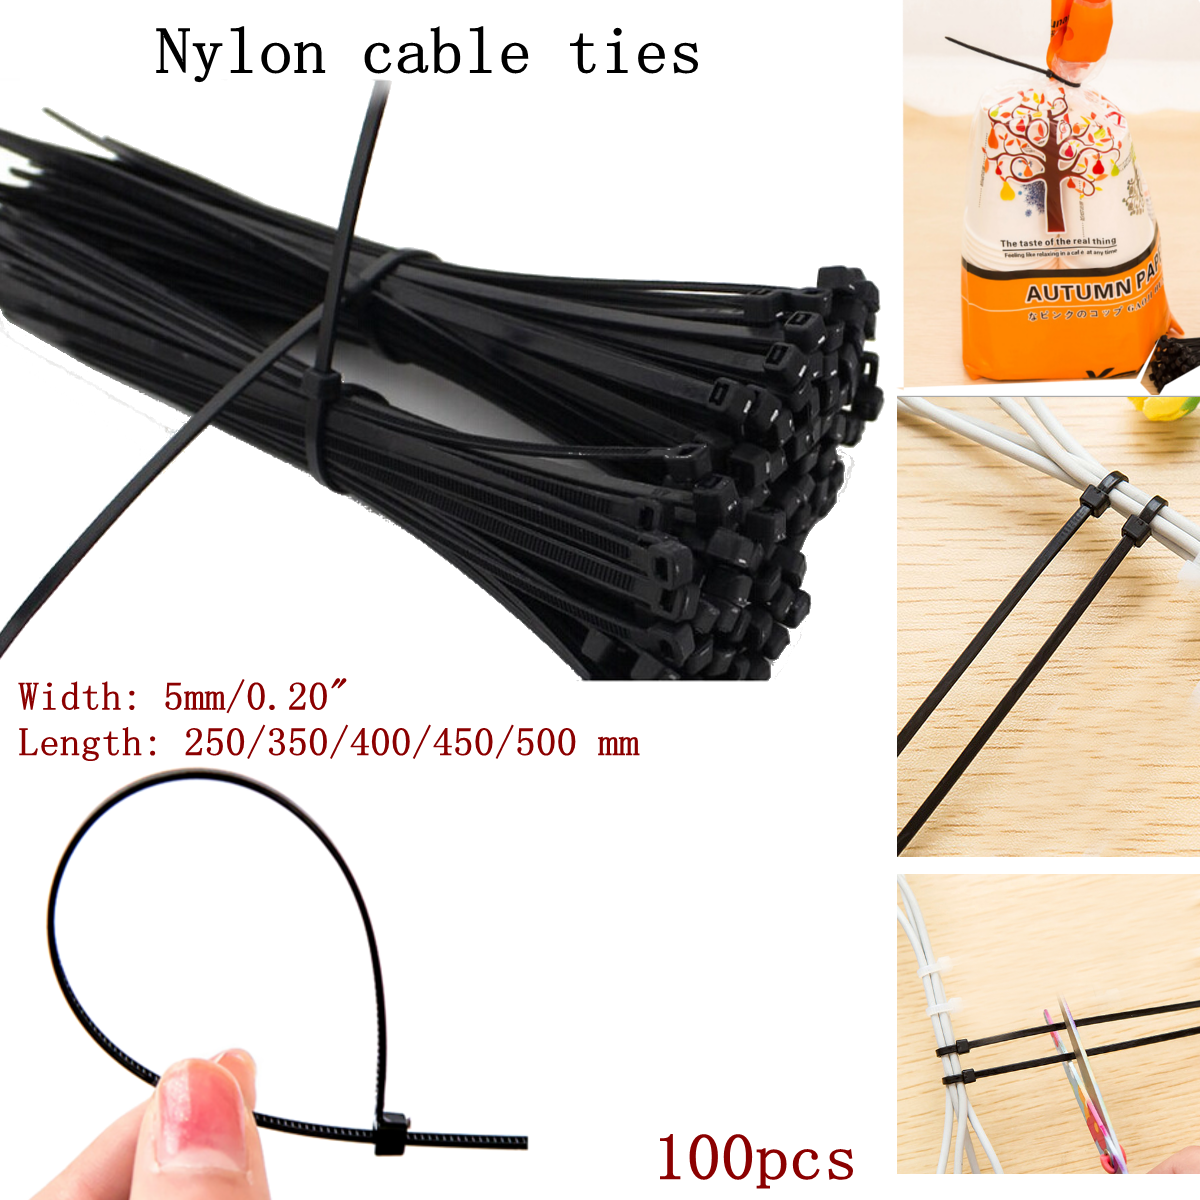 100pcs Cable Zip Ties 150mmx2.5mm Self-Locking Nylon Tie Wraps Green Single-use Locking Flexible Cable Tie 